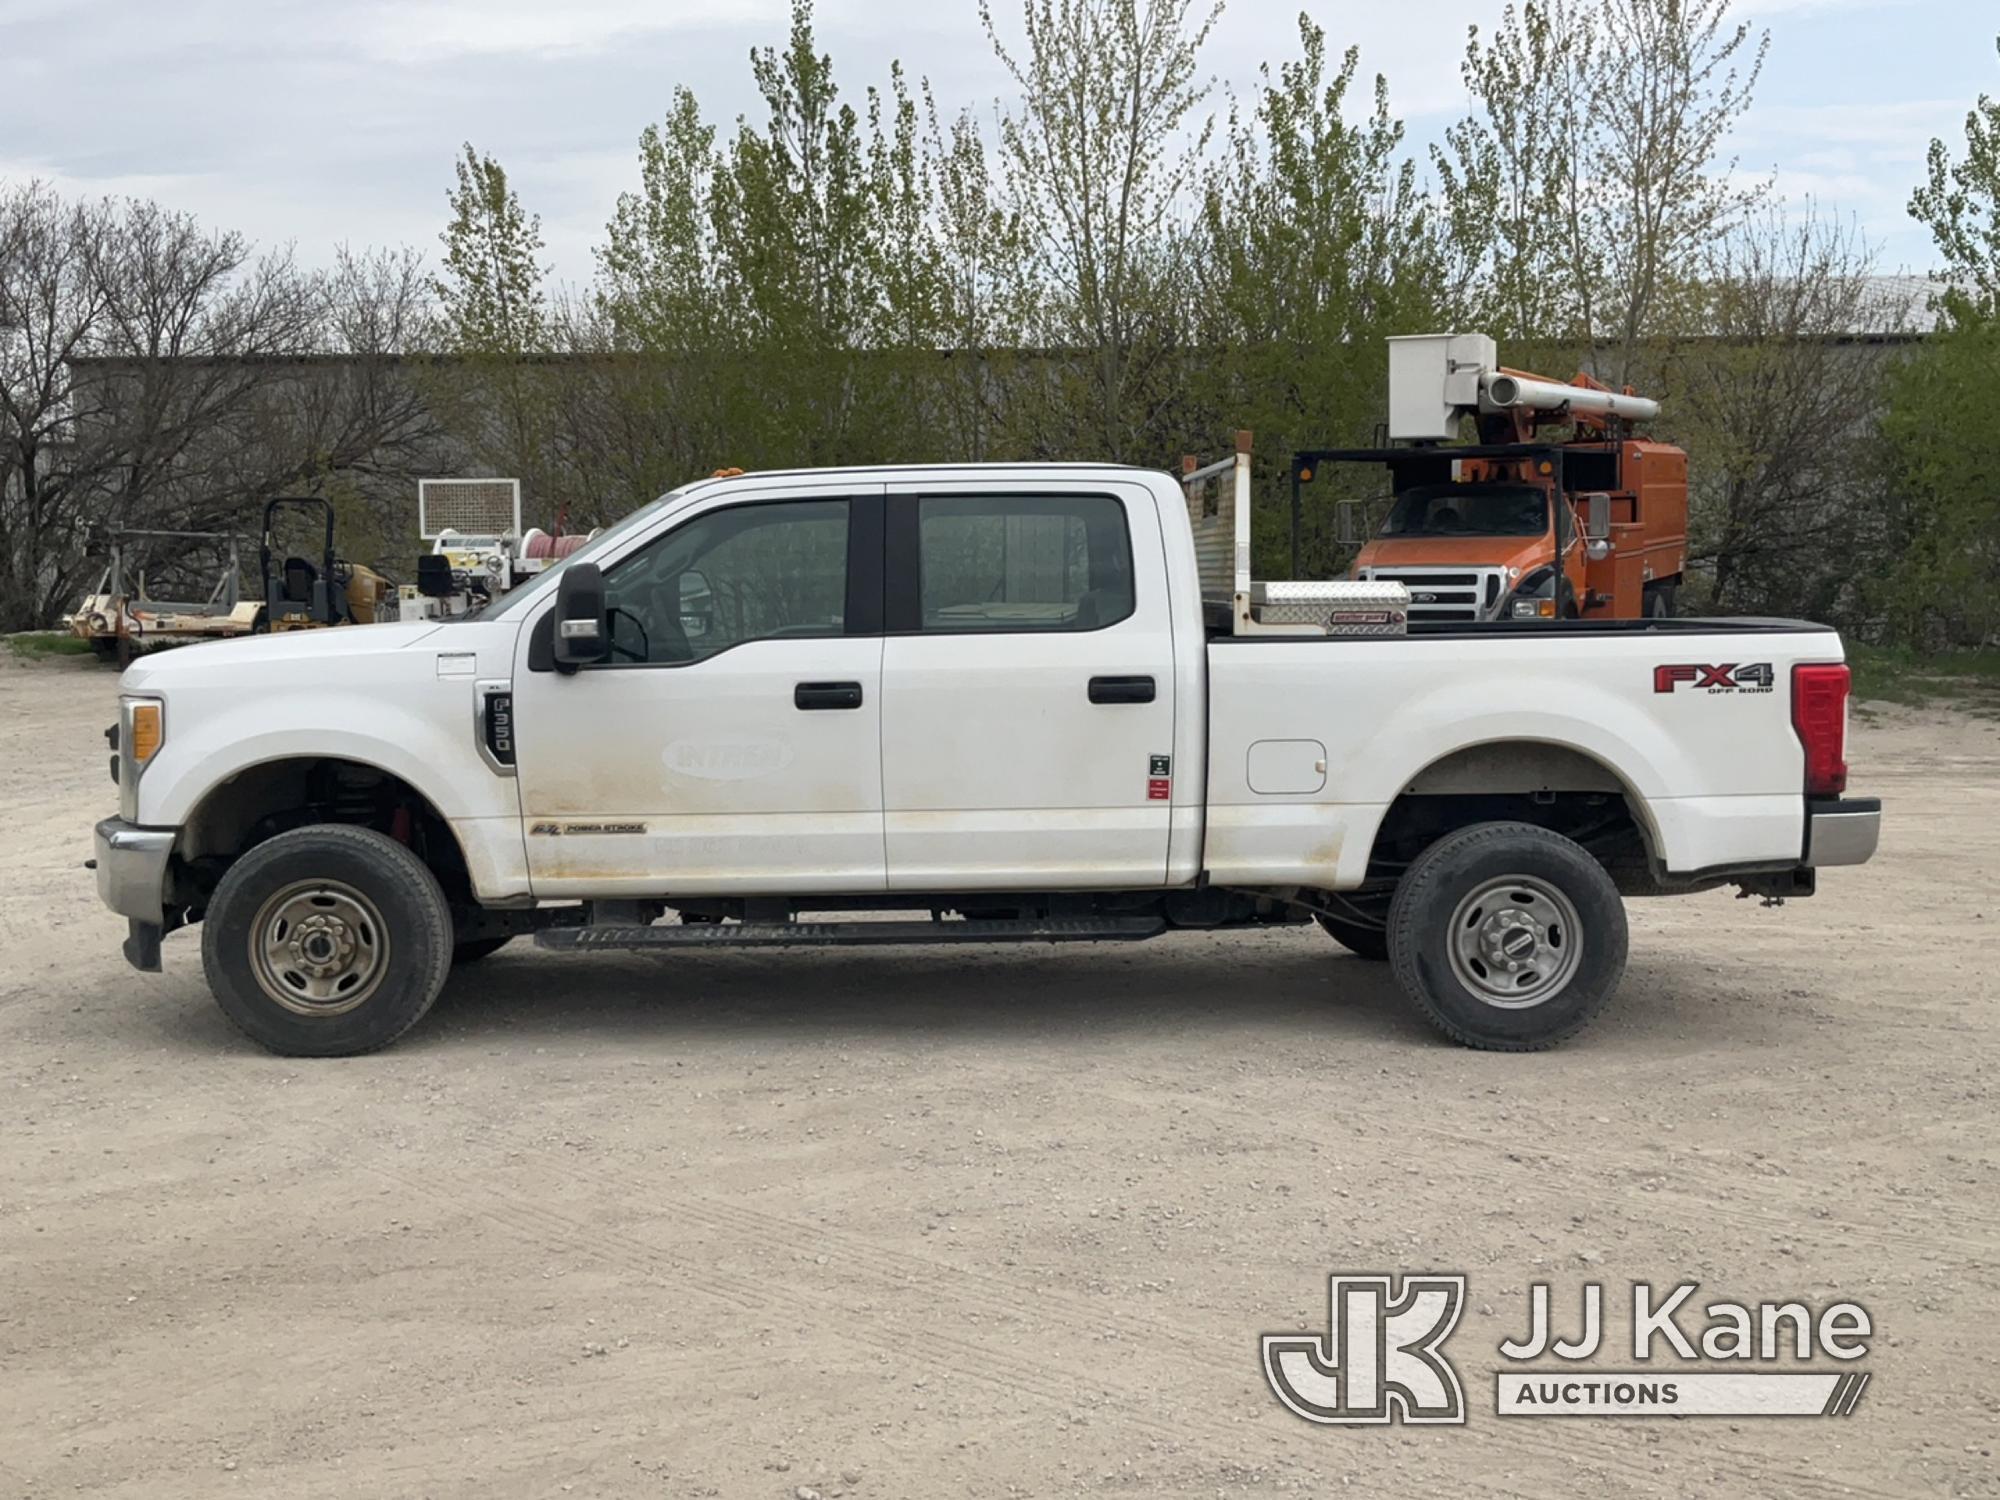 (Des Moines, IA) 2017 Ford F350 4x4 Crew-Cab Pickup Truck Runs & Moves)  (Check Engine Light